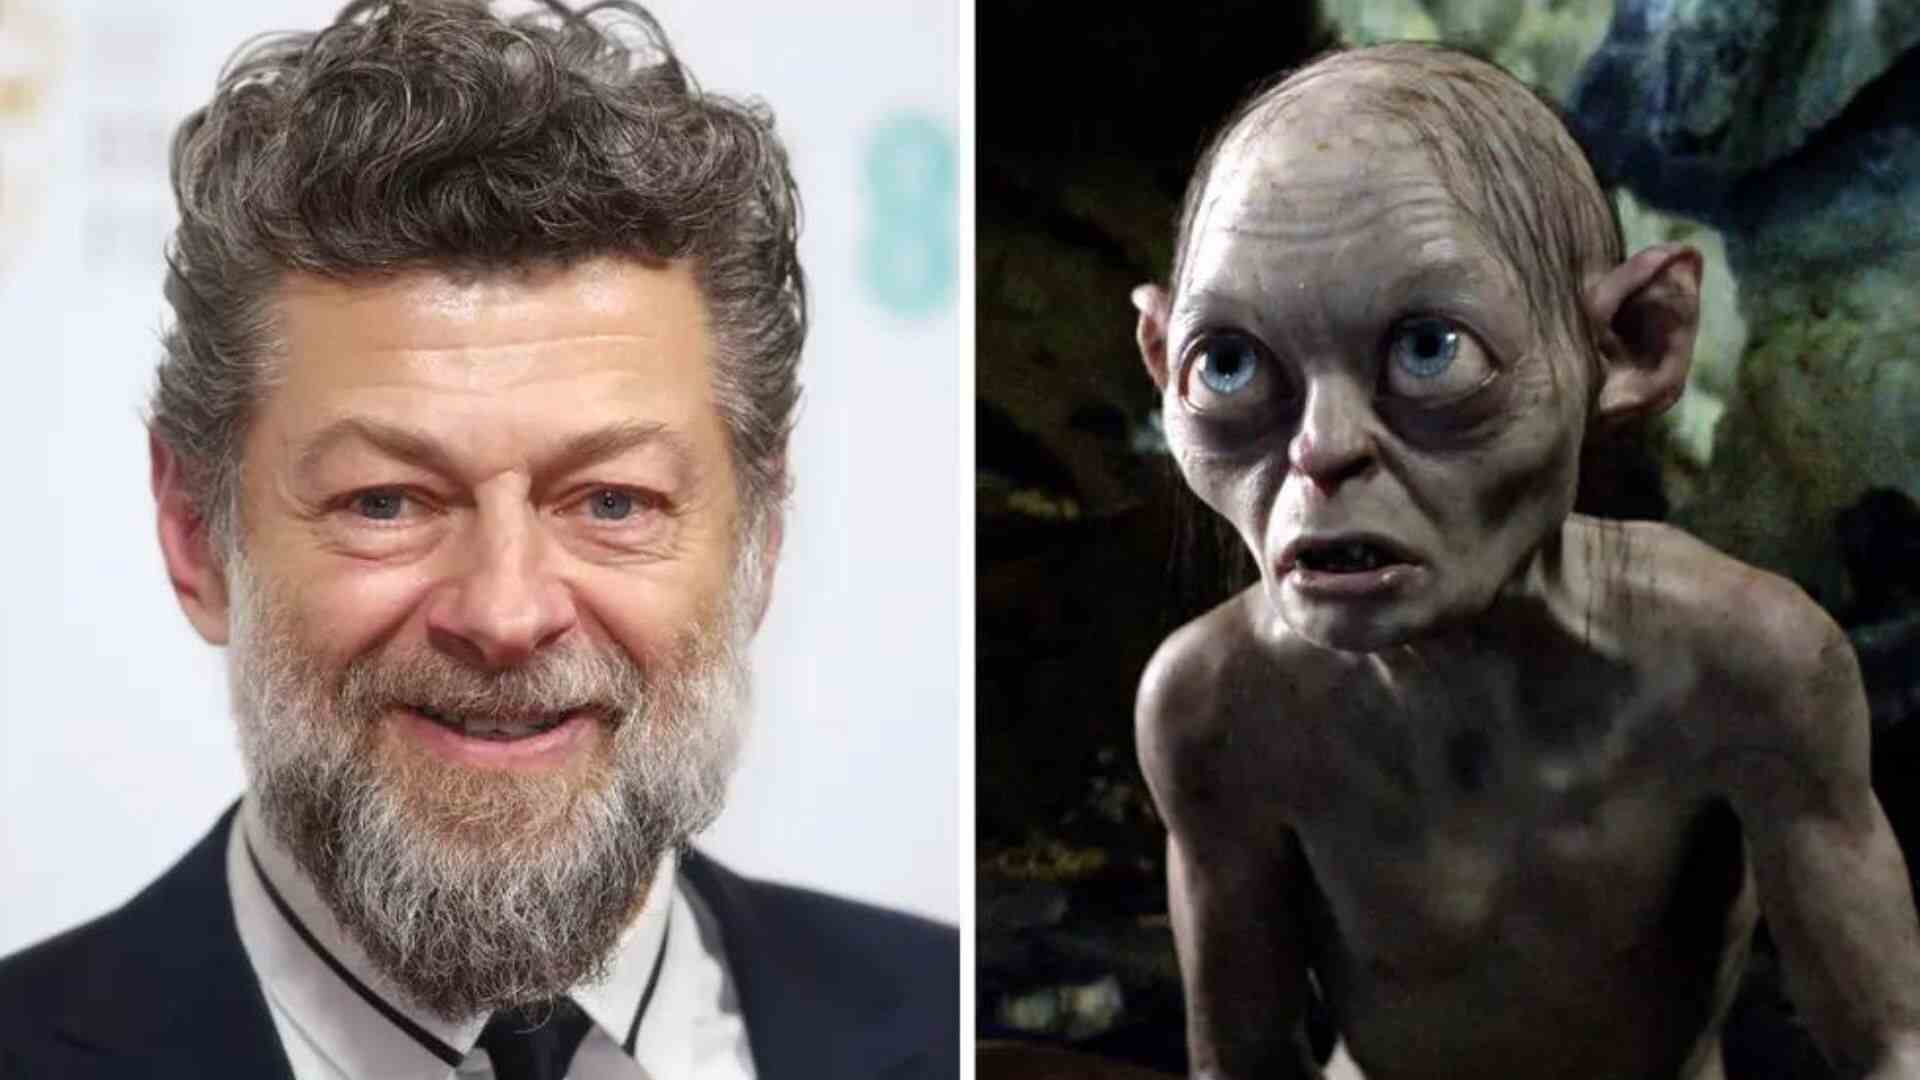 Gollum Returns: Andy Serkis Set To Reprise Iconic Role In New ‘Lord of the Rings’ Film